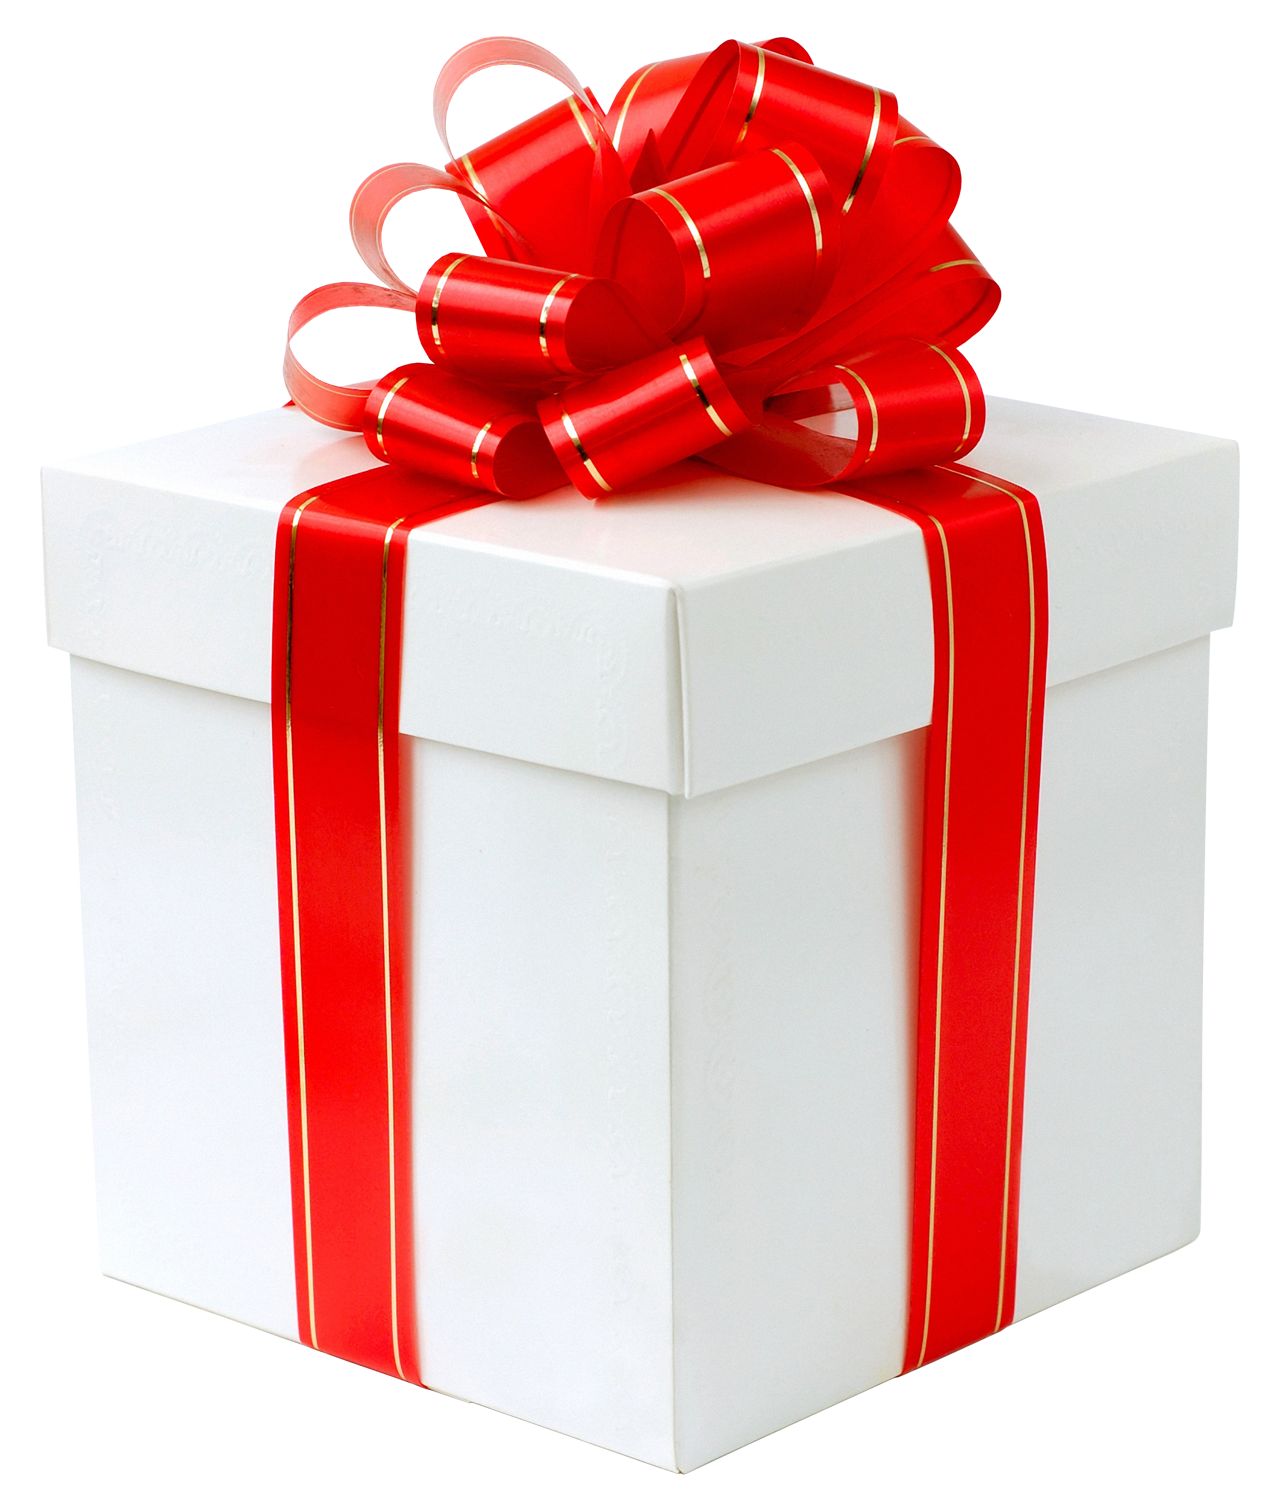 gifts clipart file